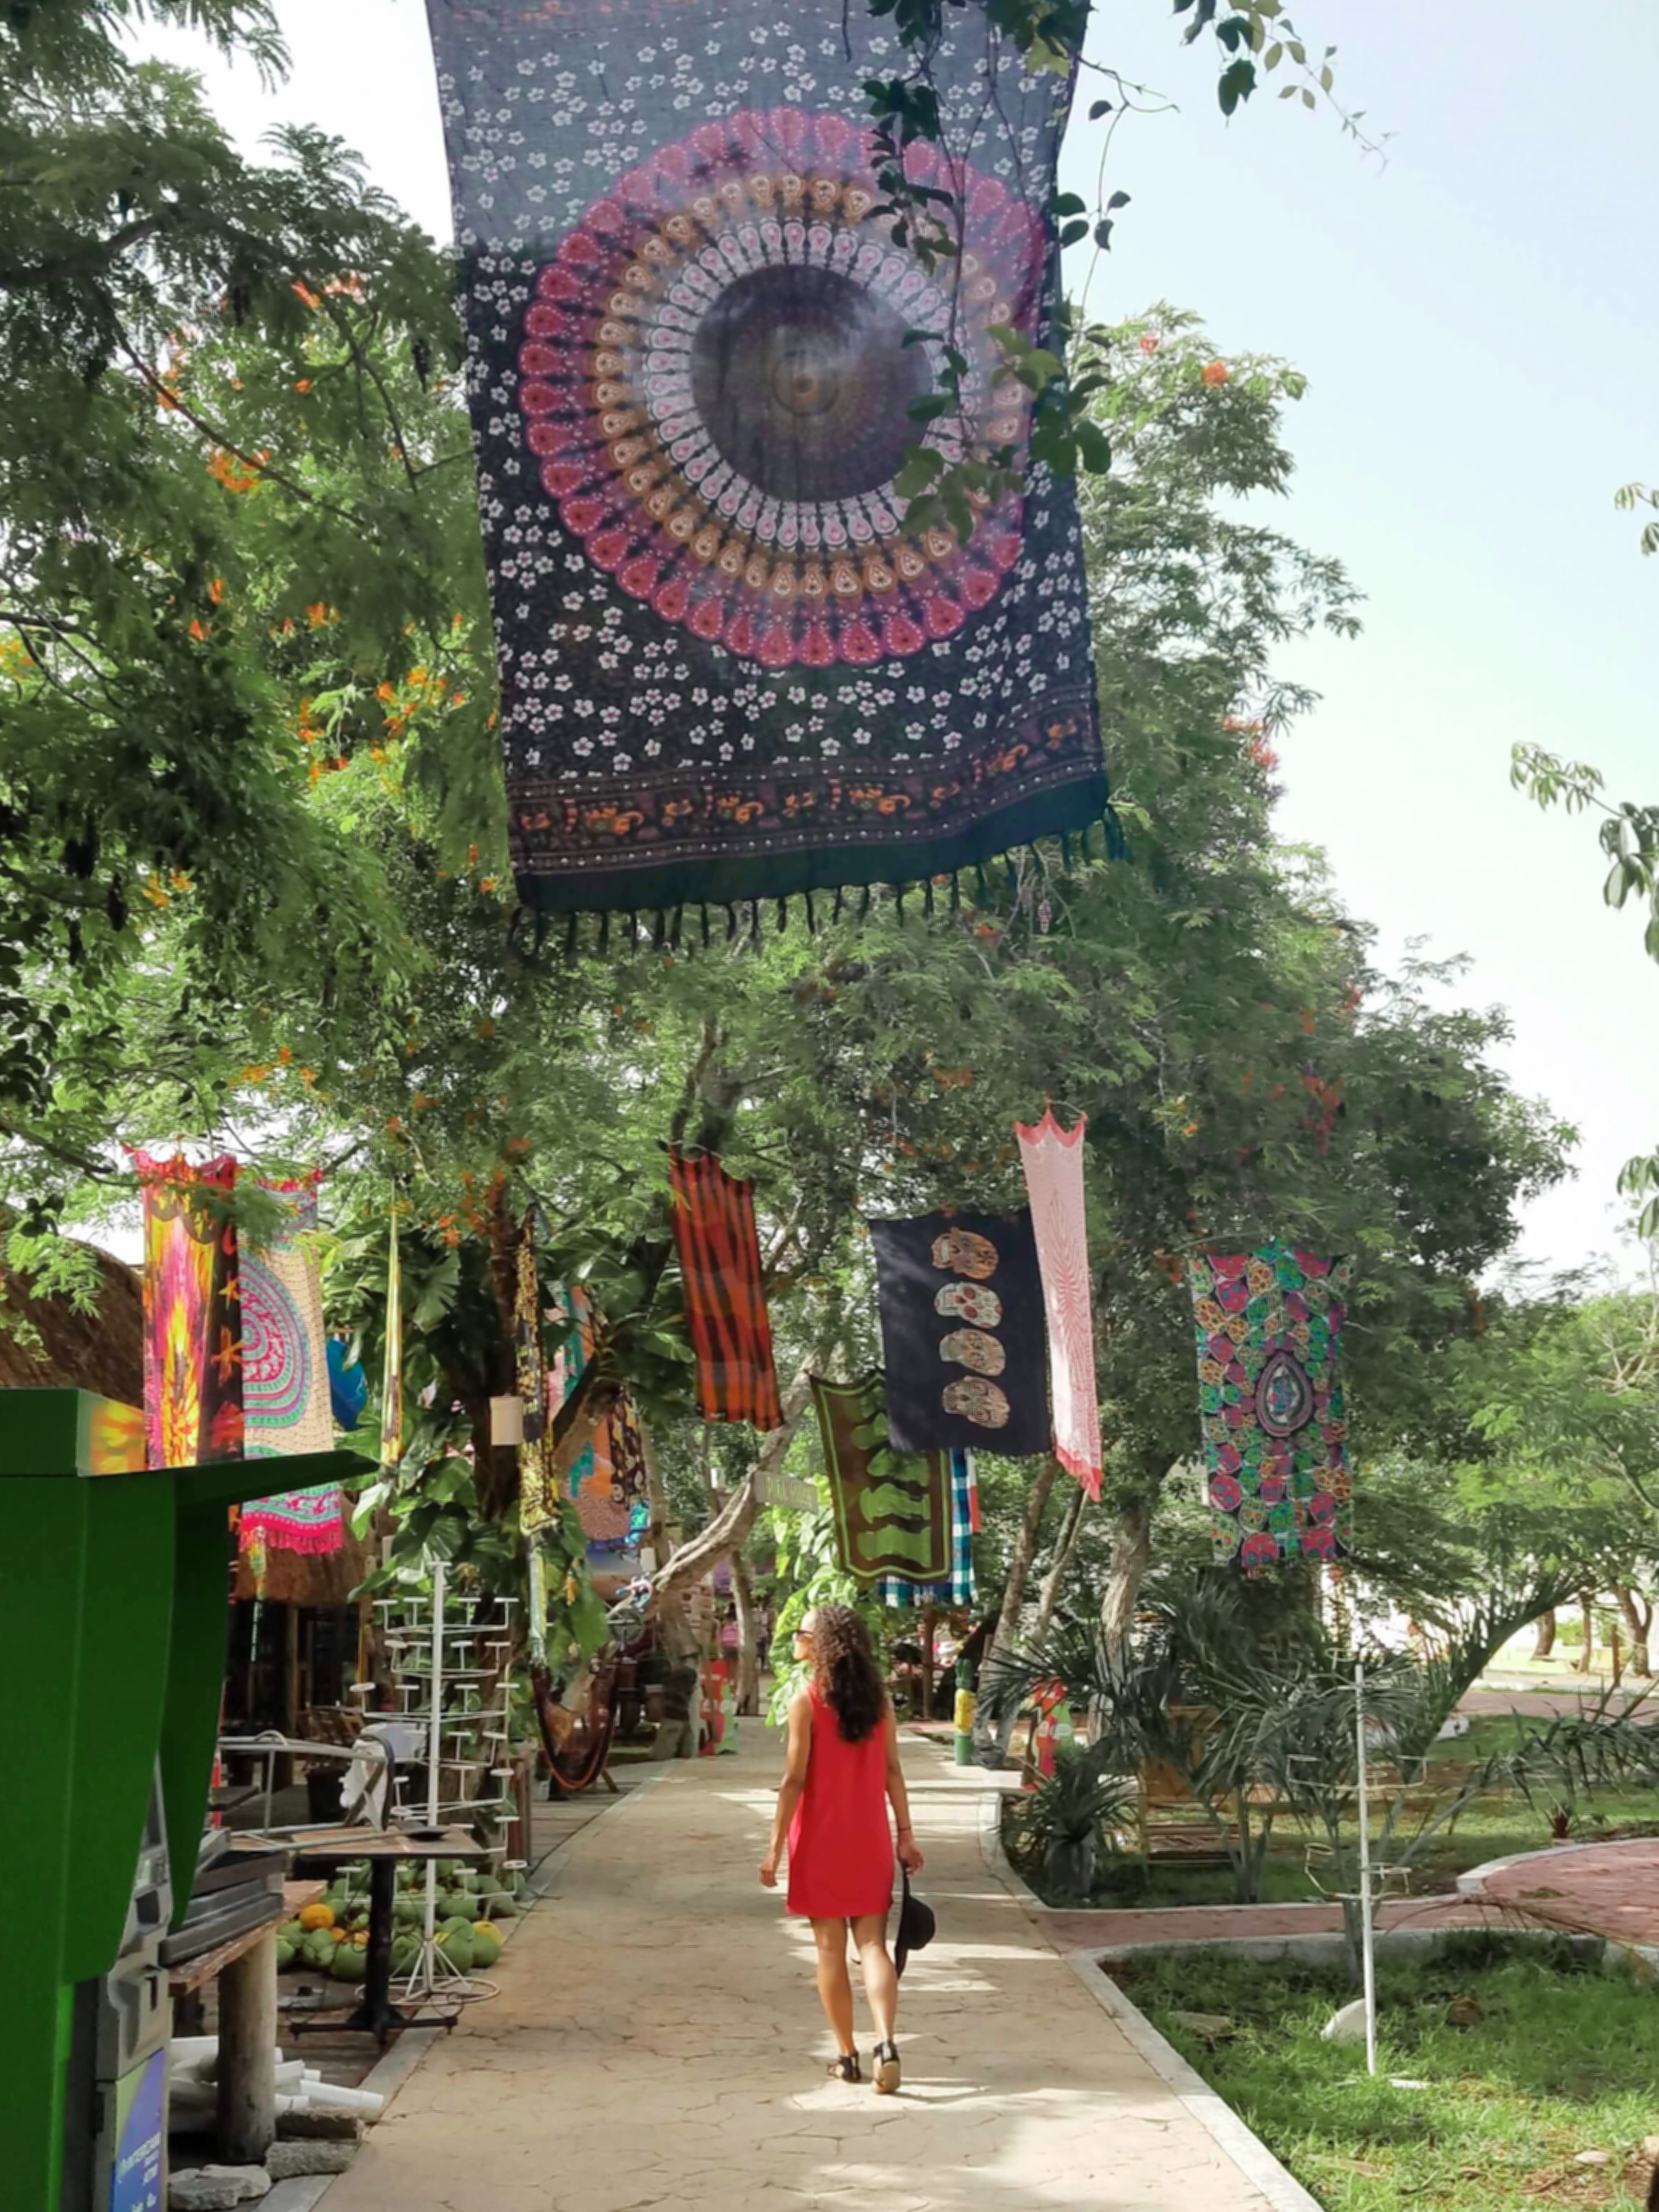 Walking past the colorful markets to the Tulum Ruins